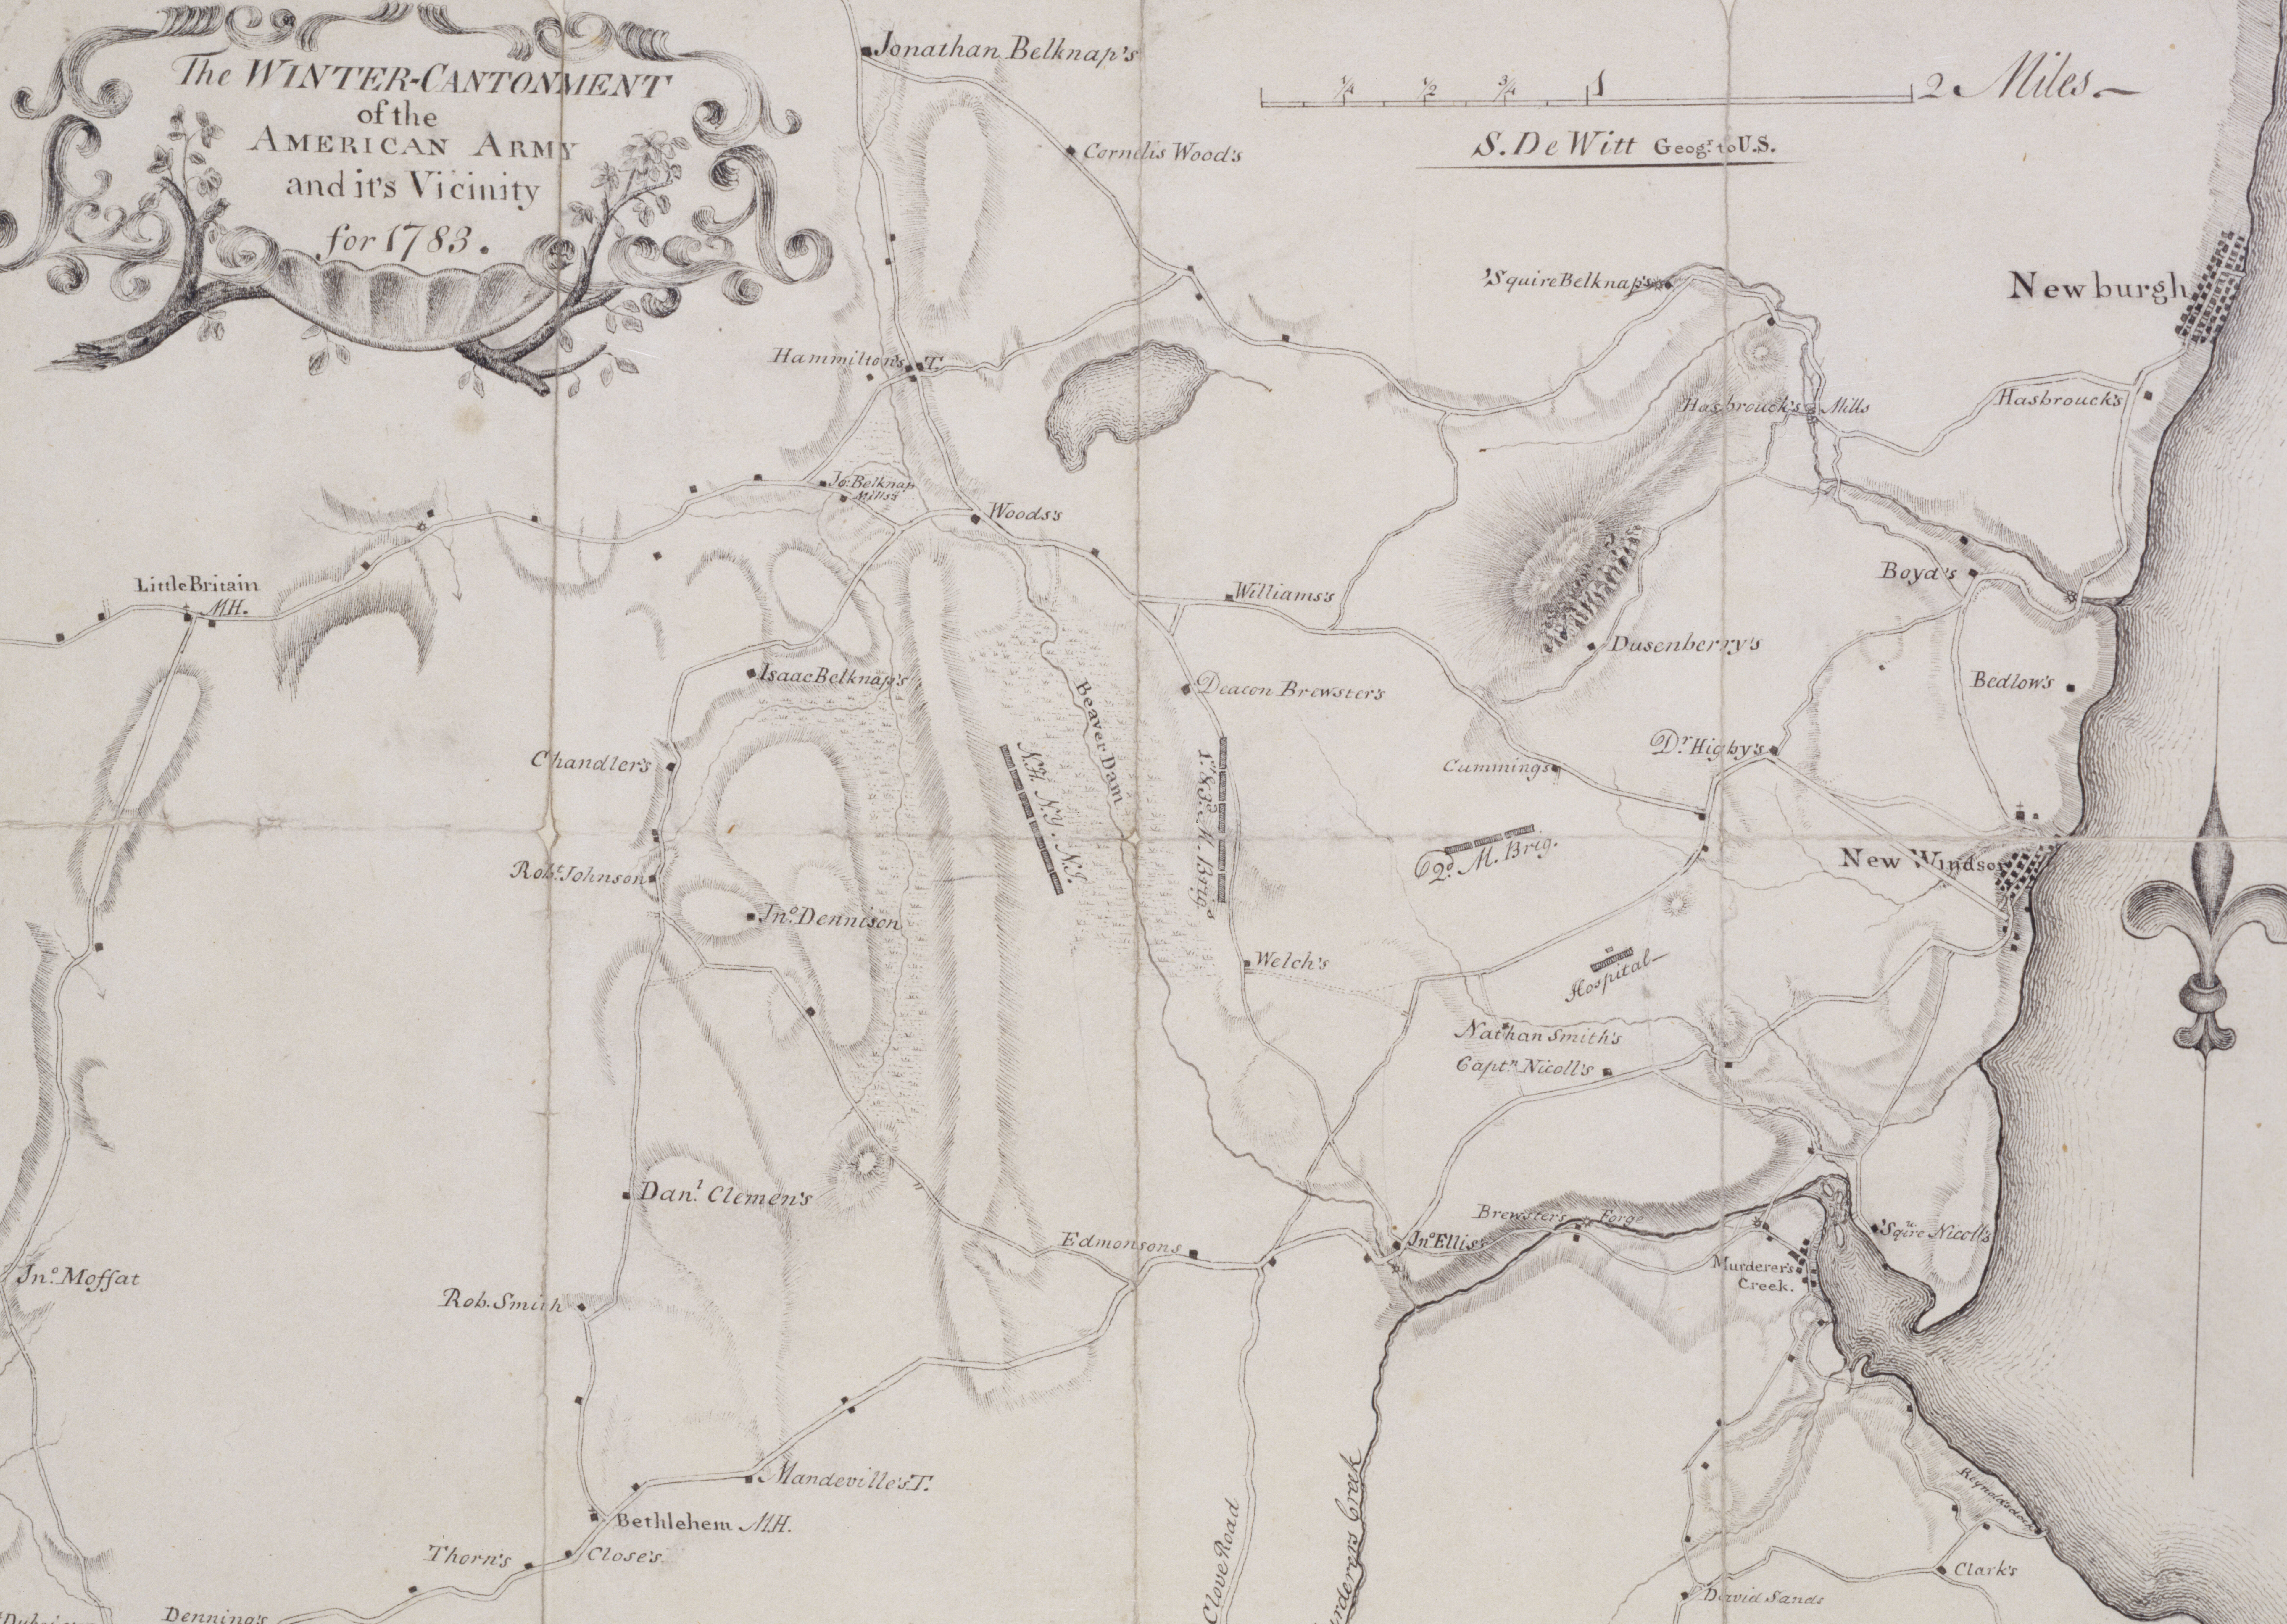 Image of Simeon De Witt's 1783 map, "The Winter-Cantonment of the American Army and it's Vicinity for 1783"